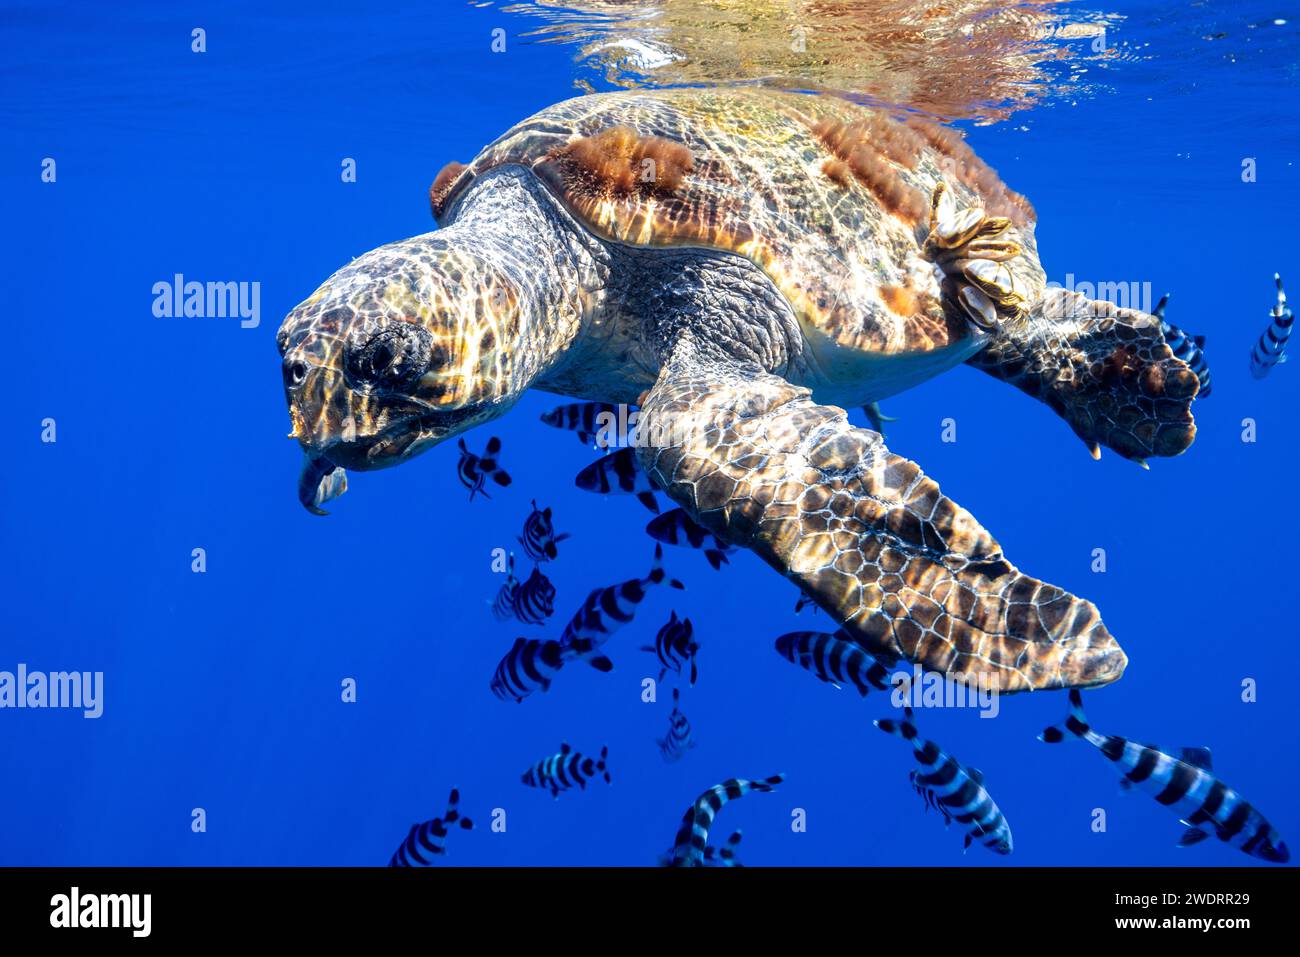 A sea turtle swims on the surface of the water with its pilot fish. Stock Photo